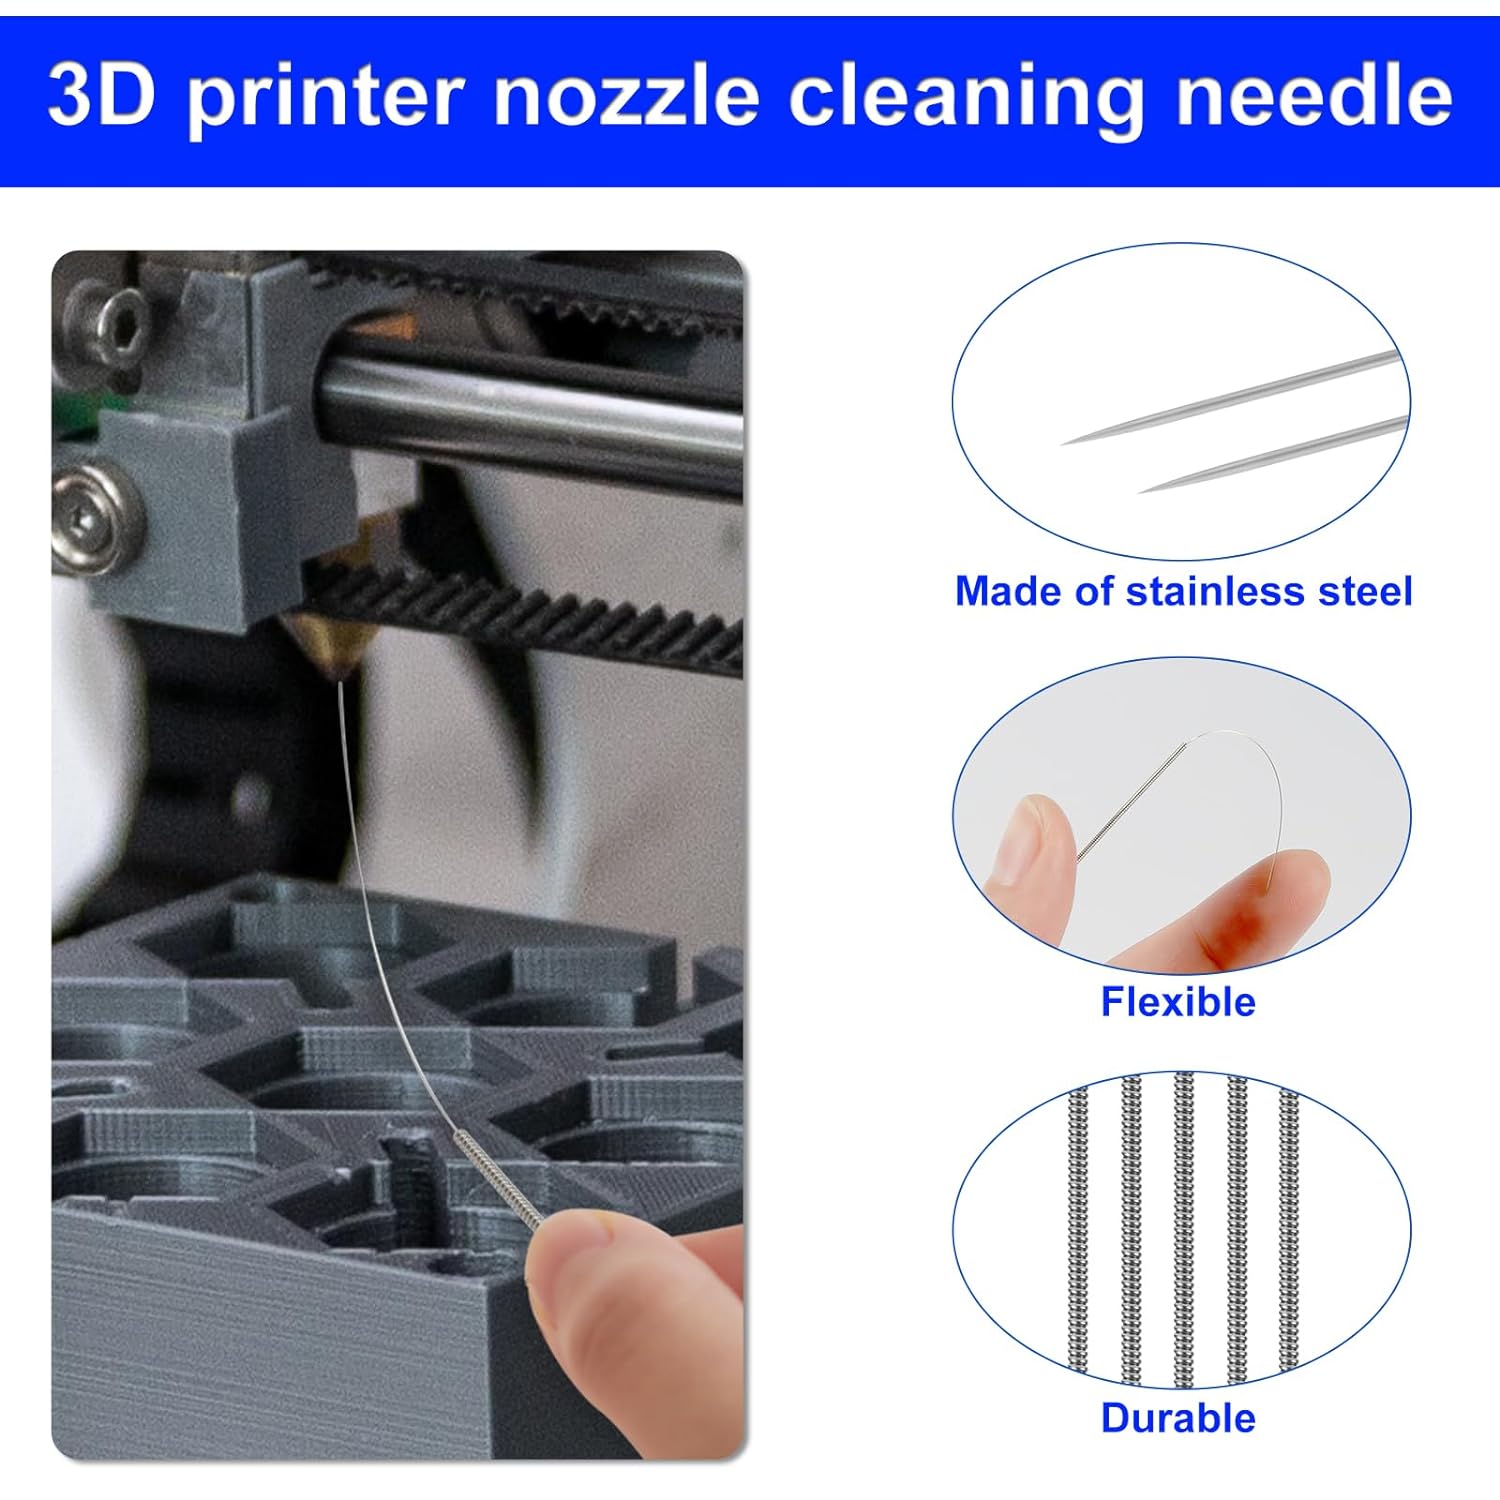 120pcs-3d-printer-nozzle-cleaning-kit-04mm-stainless-steel-3d-printing-nozzle-needles-3d-printer-nozzle-cleaning-needles-3 120pcs 3D Printer Nozzle Cleaning Kit Review